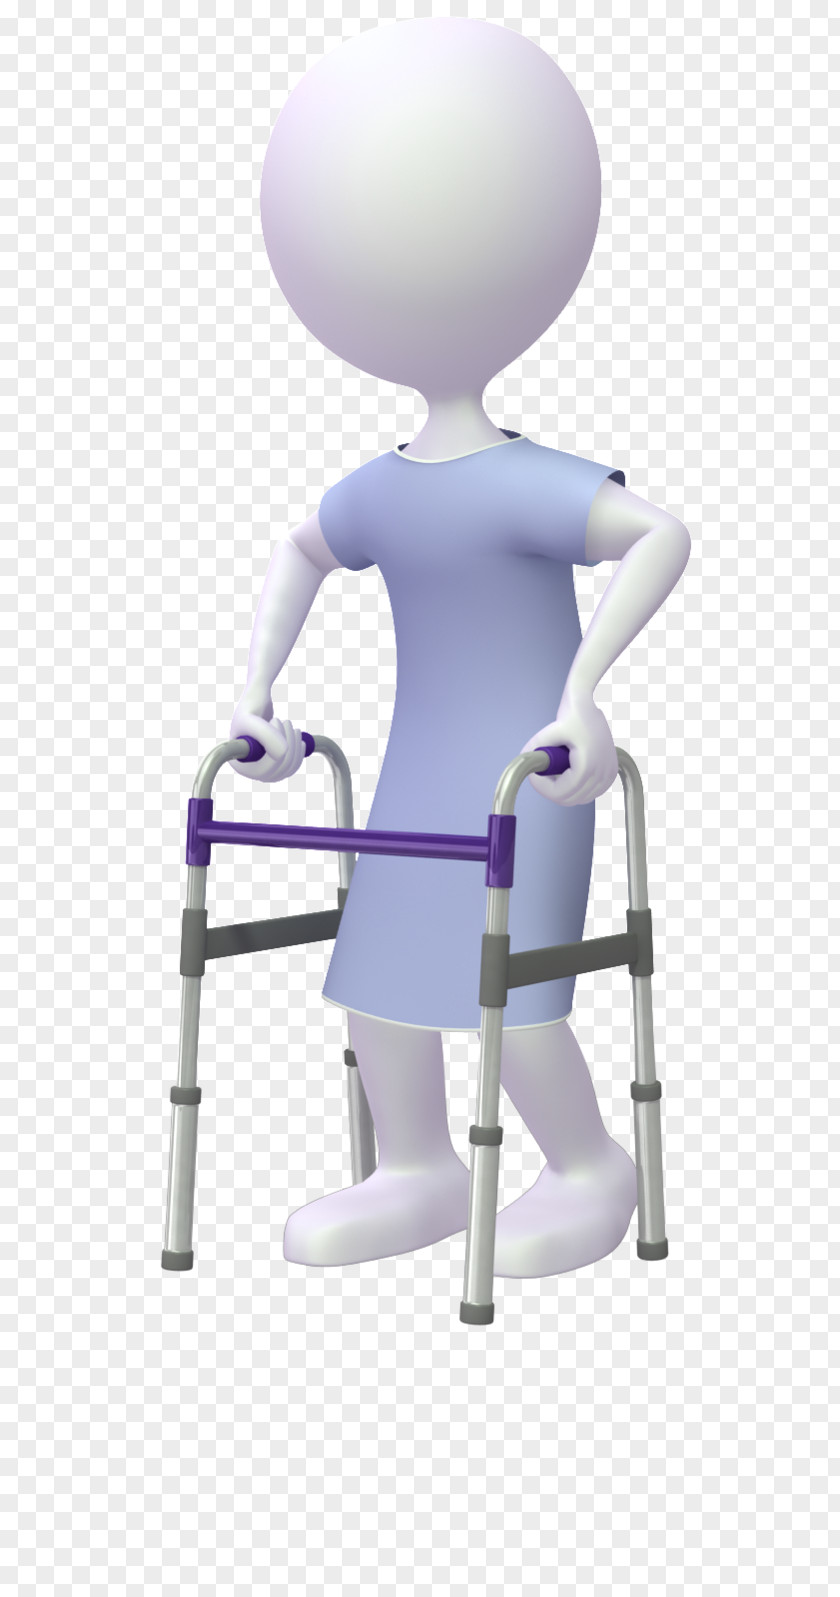 Chair Plastic Medical Equipment PNG